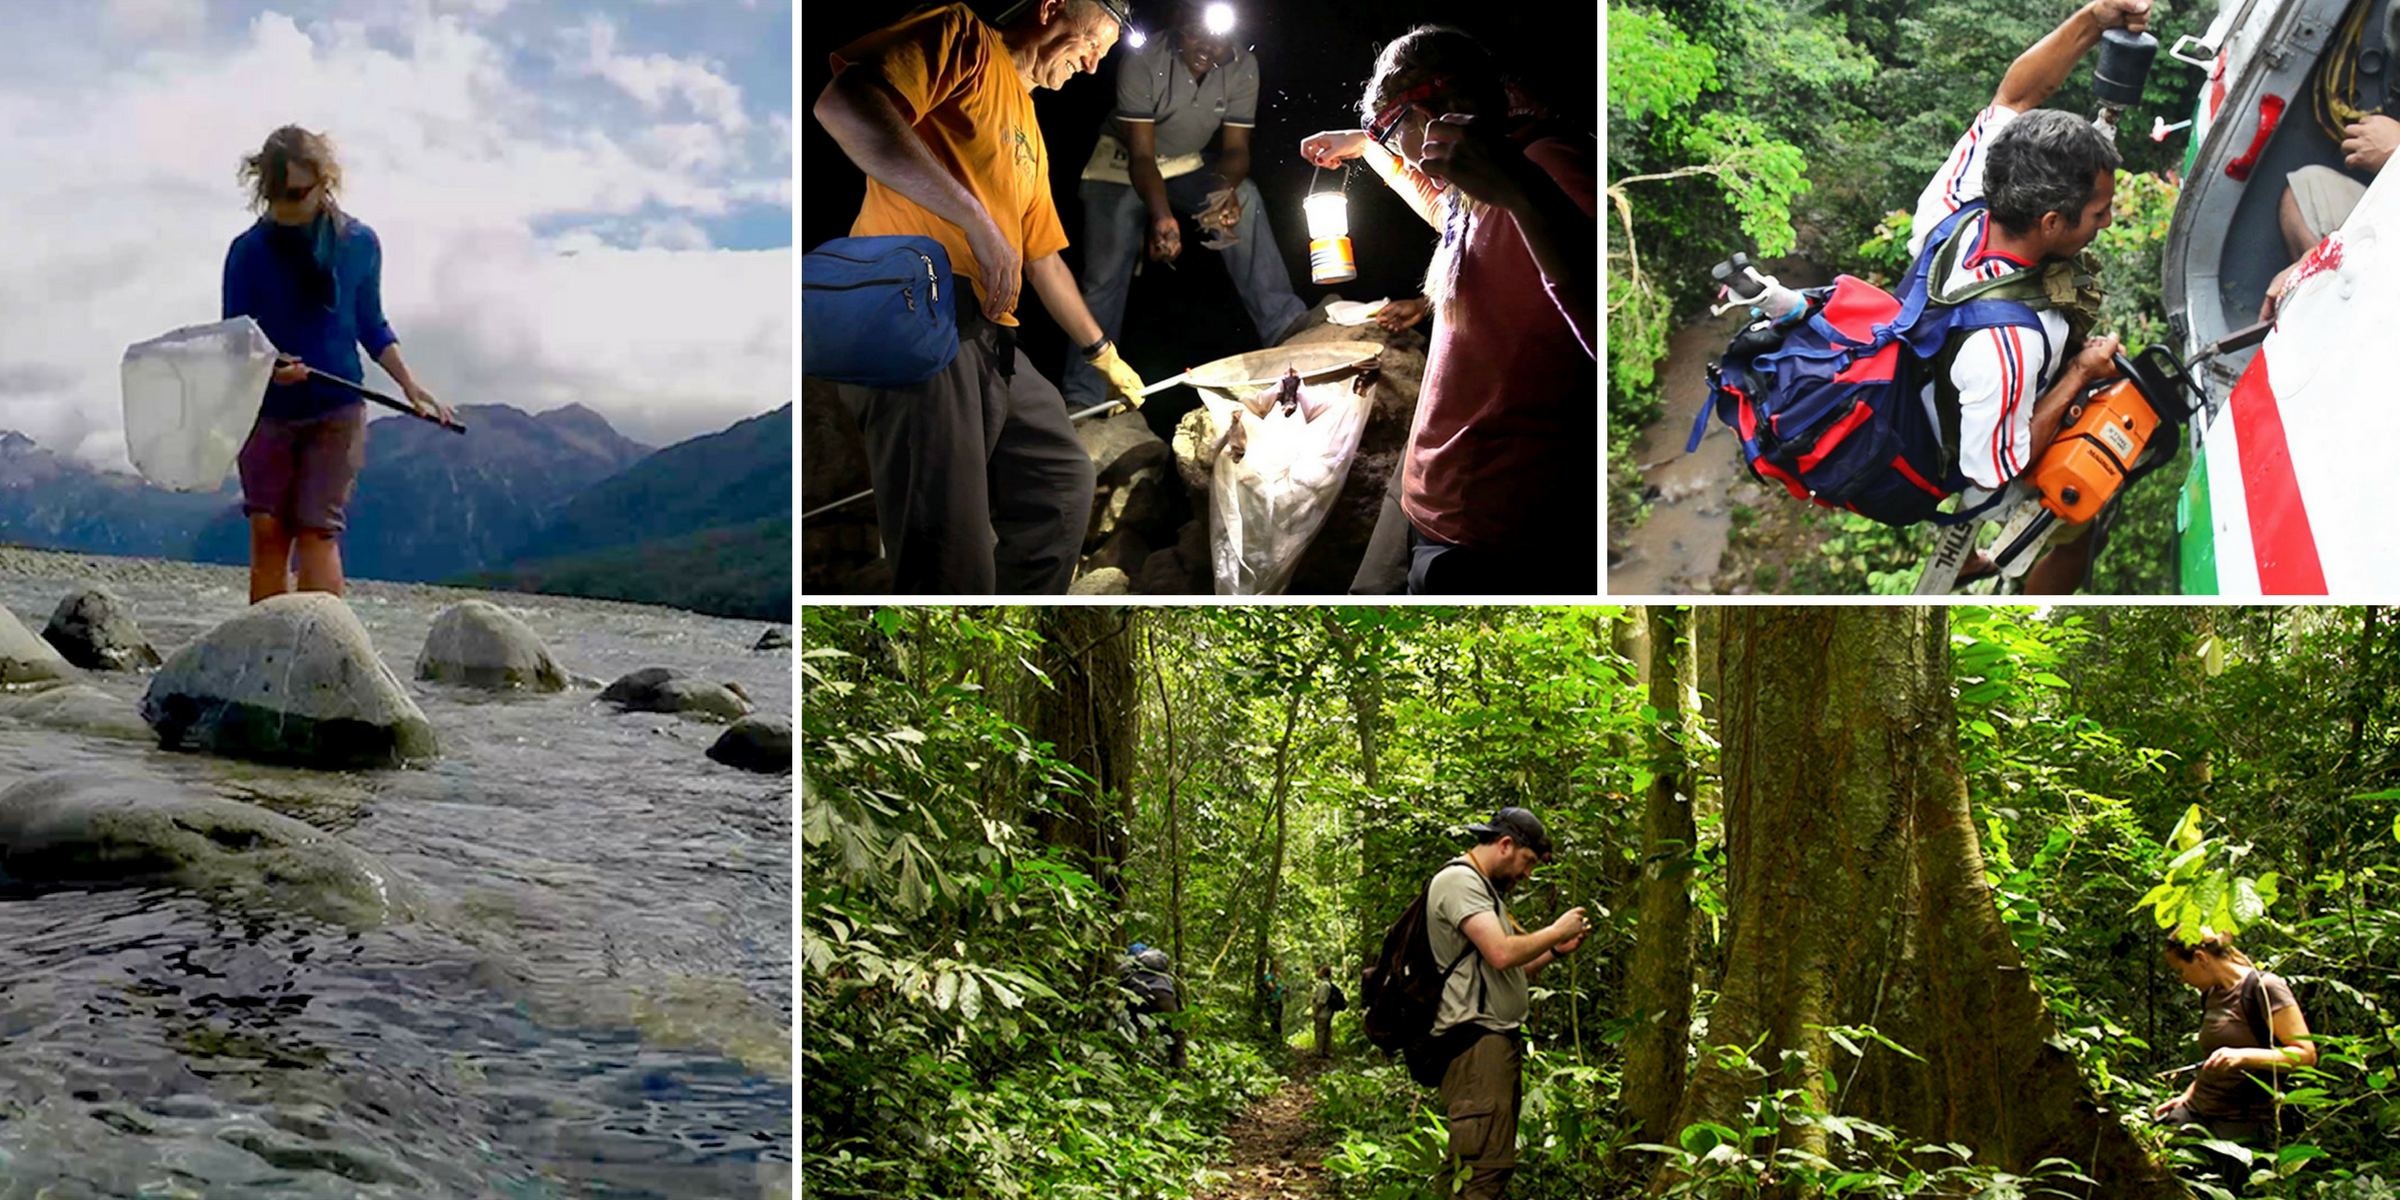 Collage of photos showing people out in in different environments: a woman using a net in a stream, two people inspecting trees in a forest, a man climbing out of a plane, and people holding lanterns